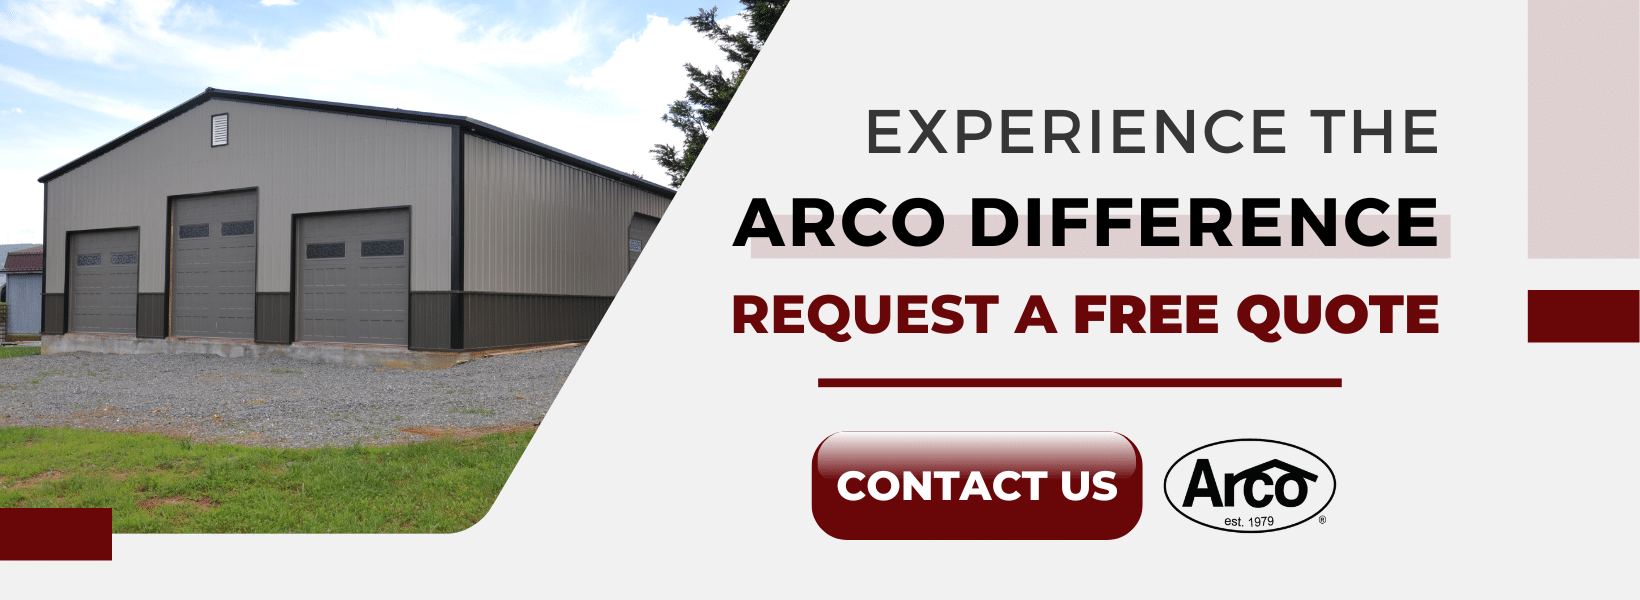 Contact Arco Now!